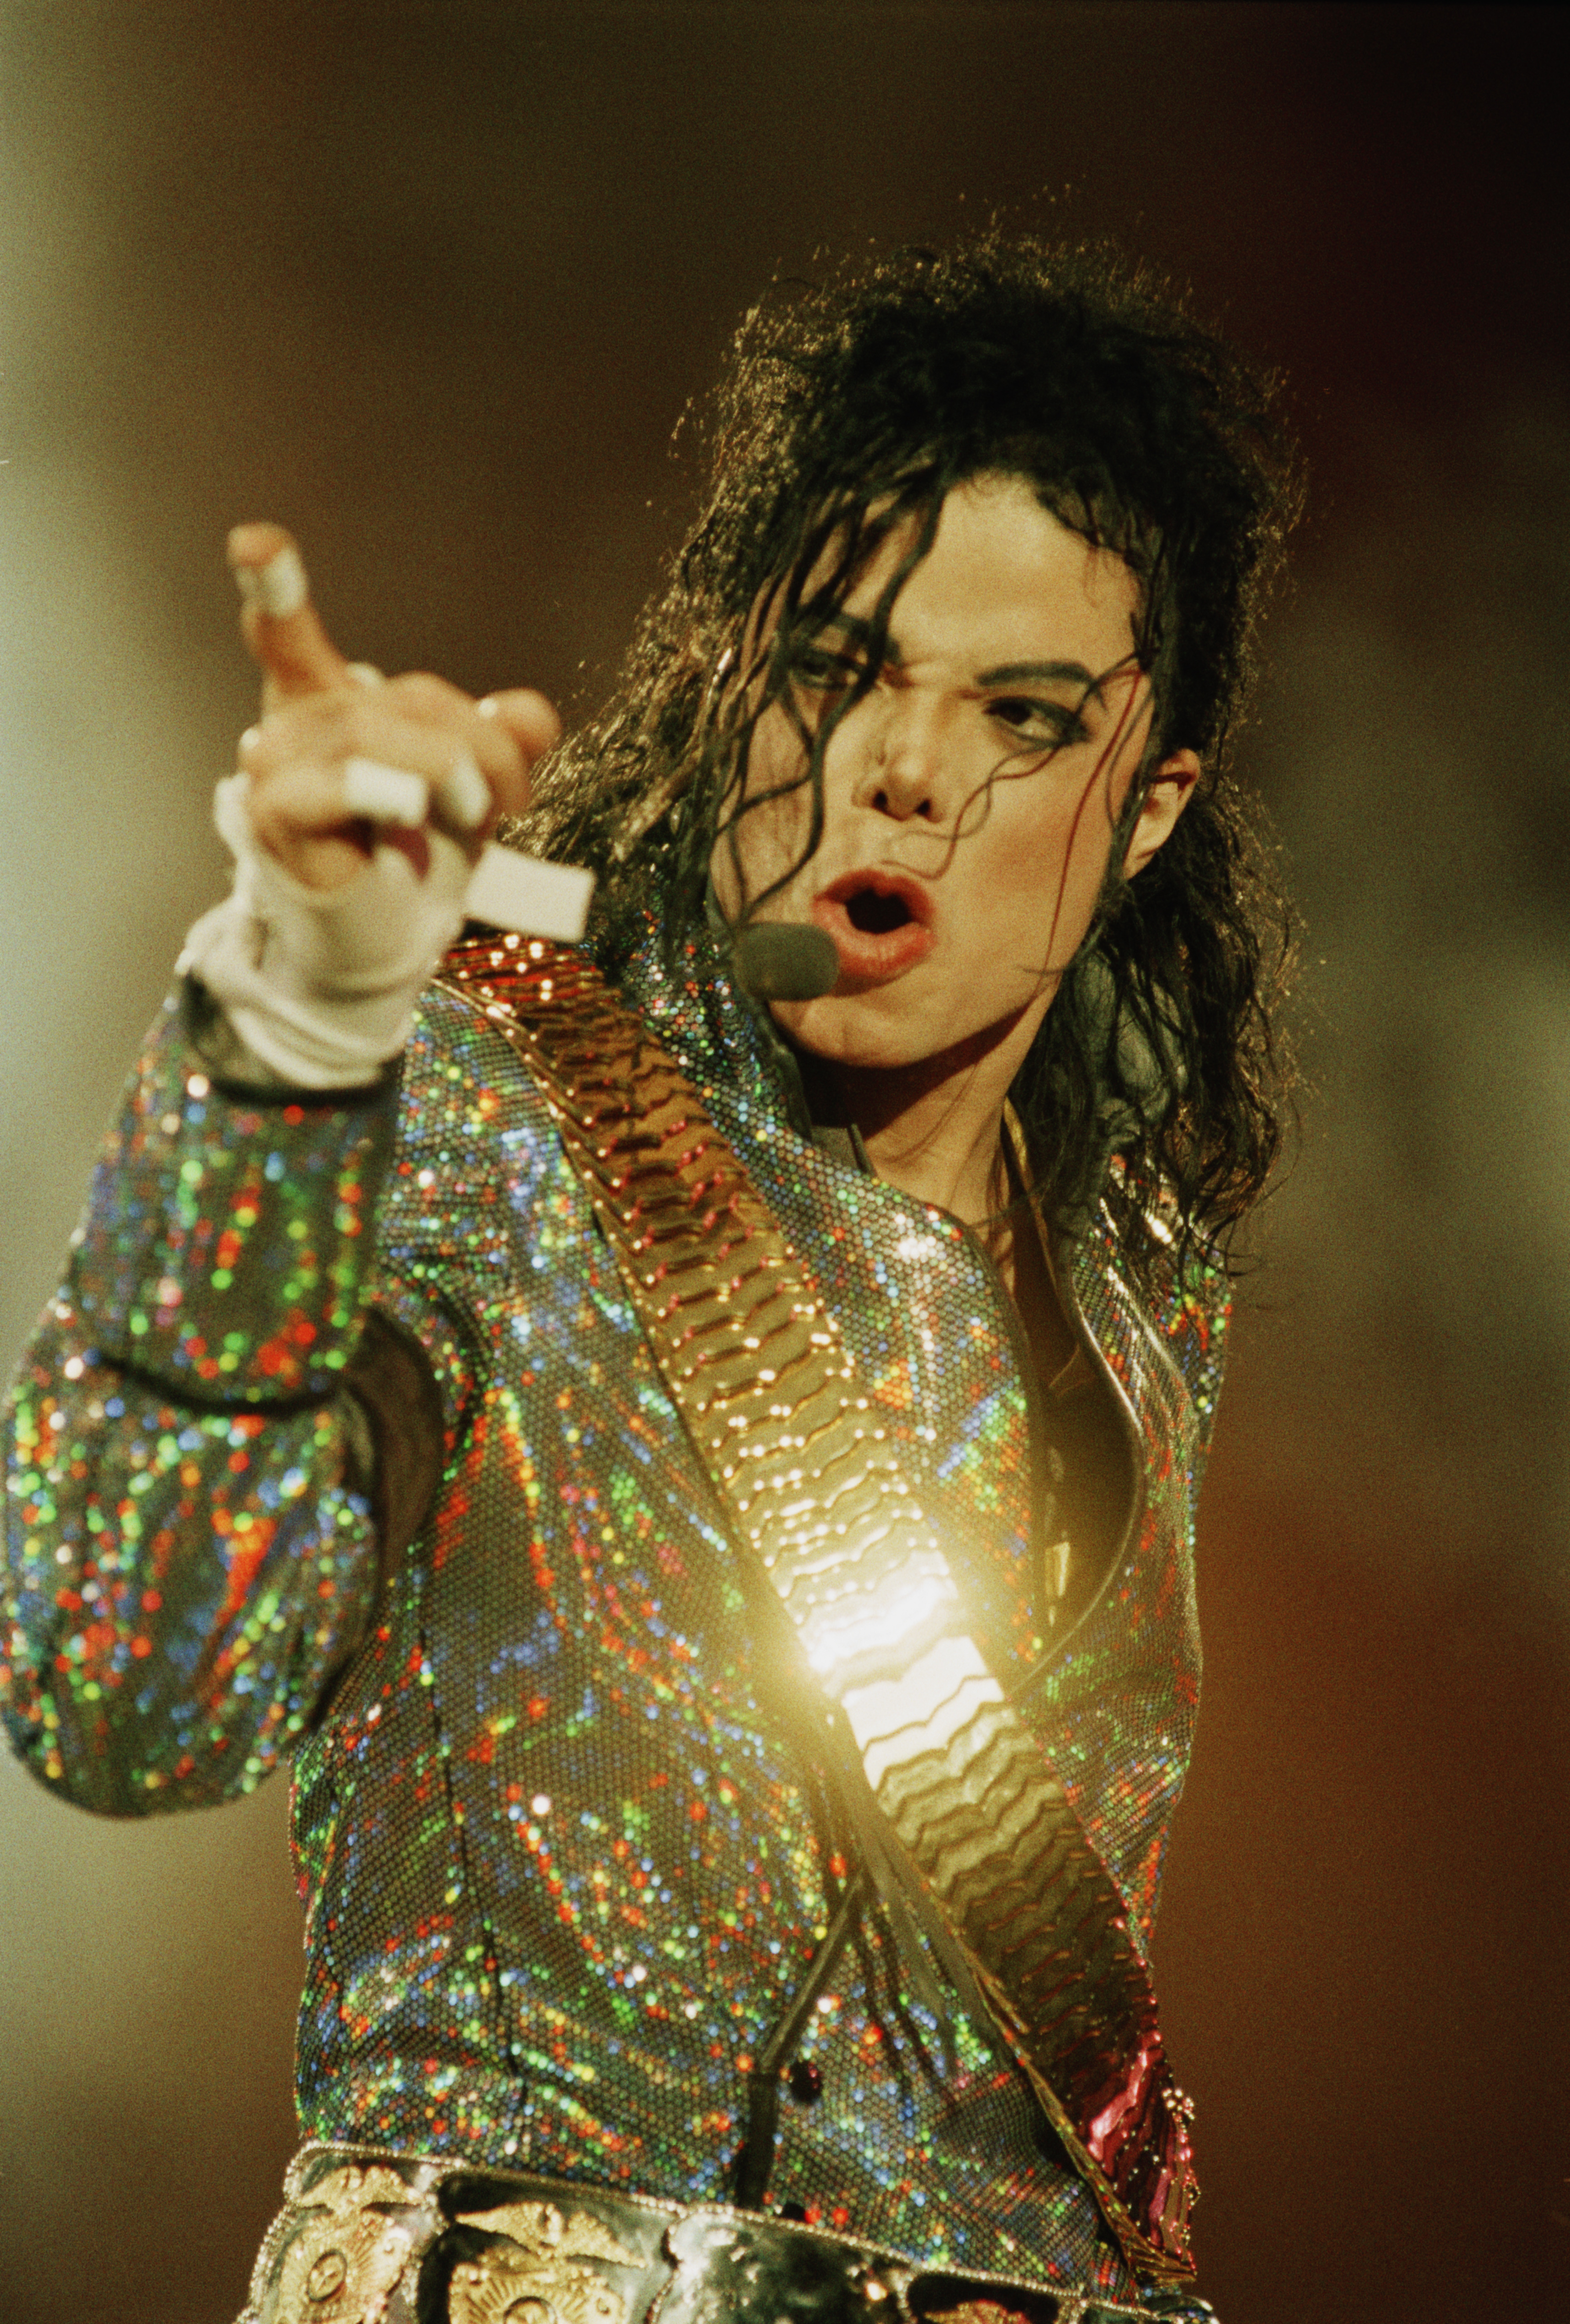 Michael Jackson  performing at Wembley Stadium in London for his 'Dangerous' World Tour in 1992 | Source: Getty Images